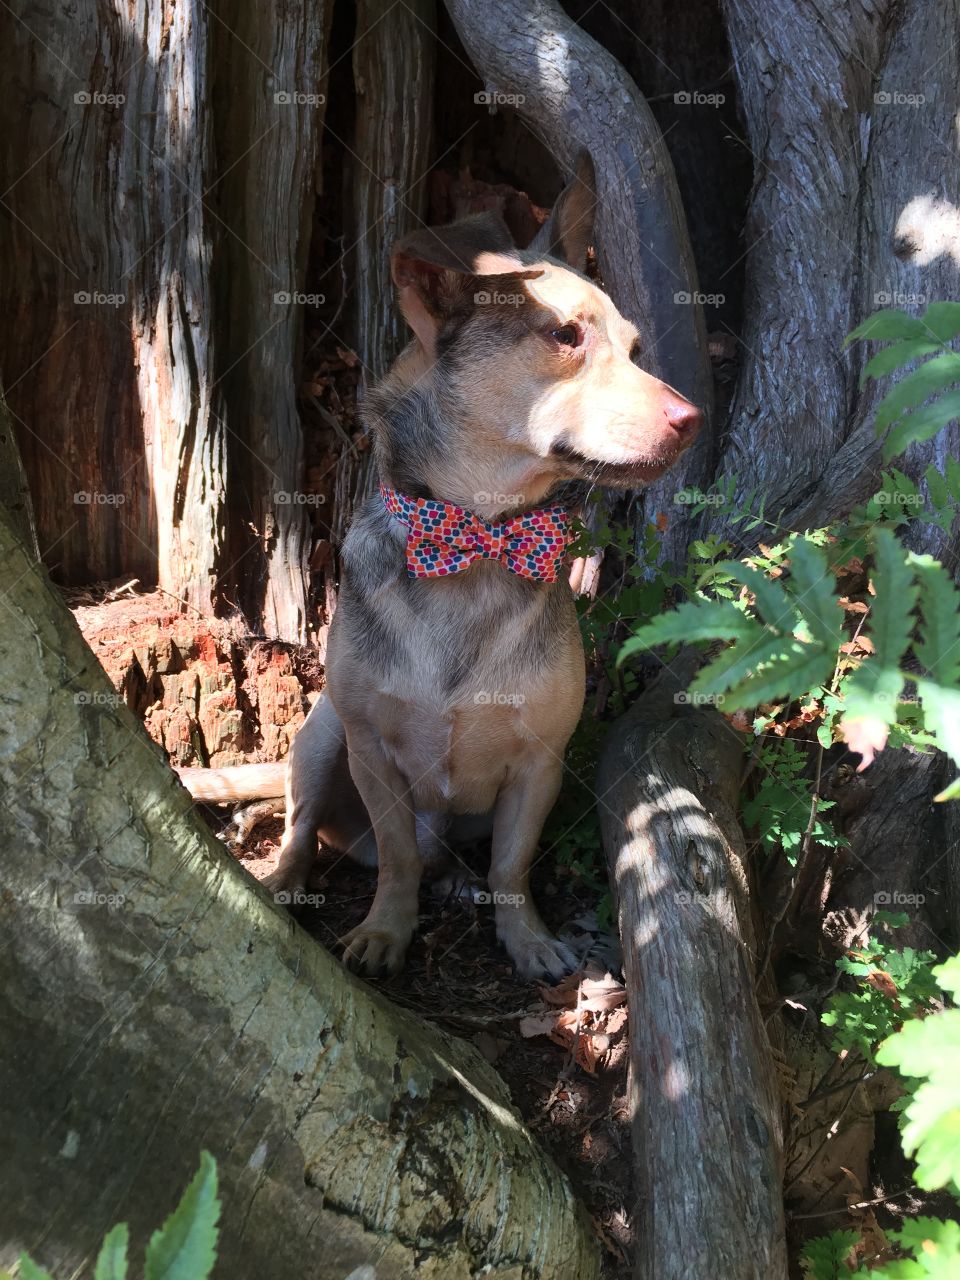 Oliver's first time in the woods